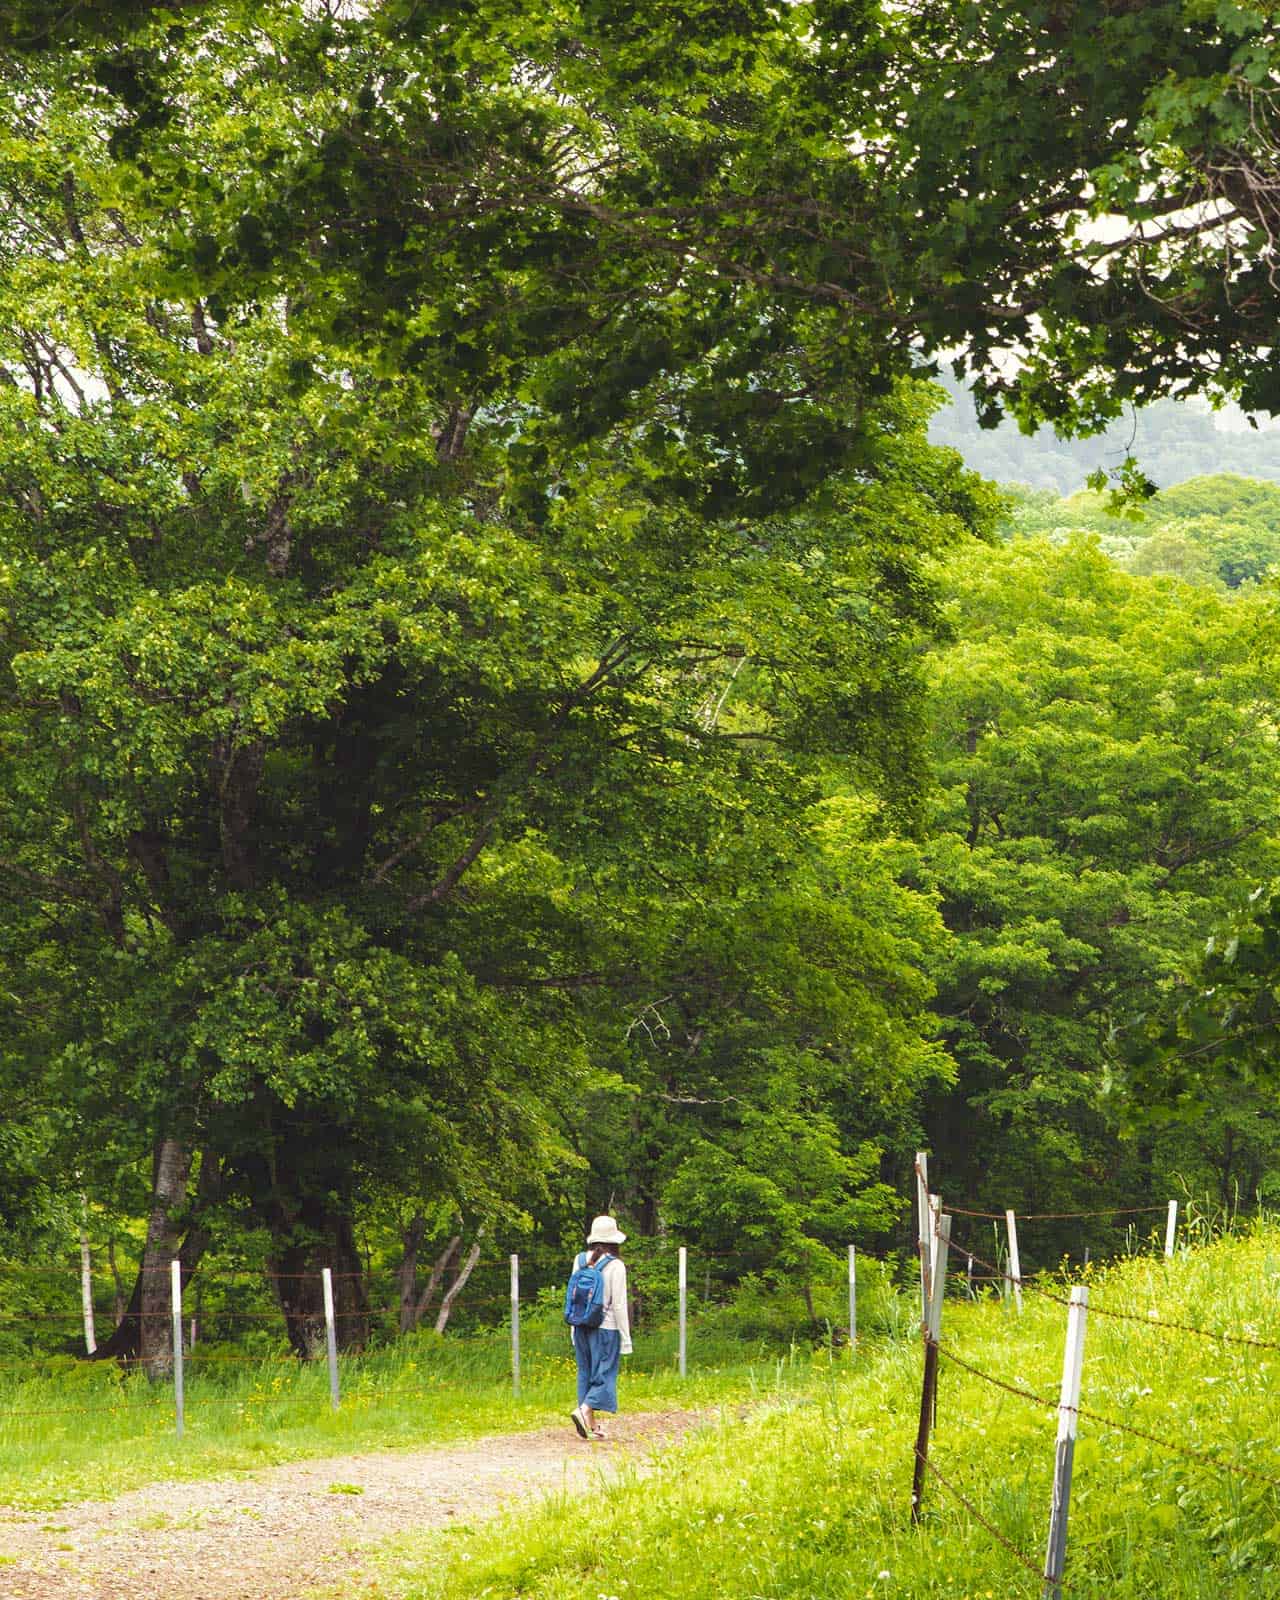 A woman walking on a hiking trail surrounded by lush green trees.